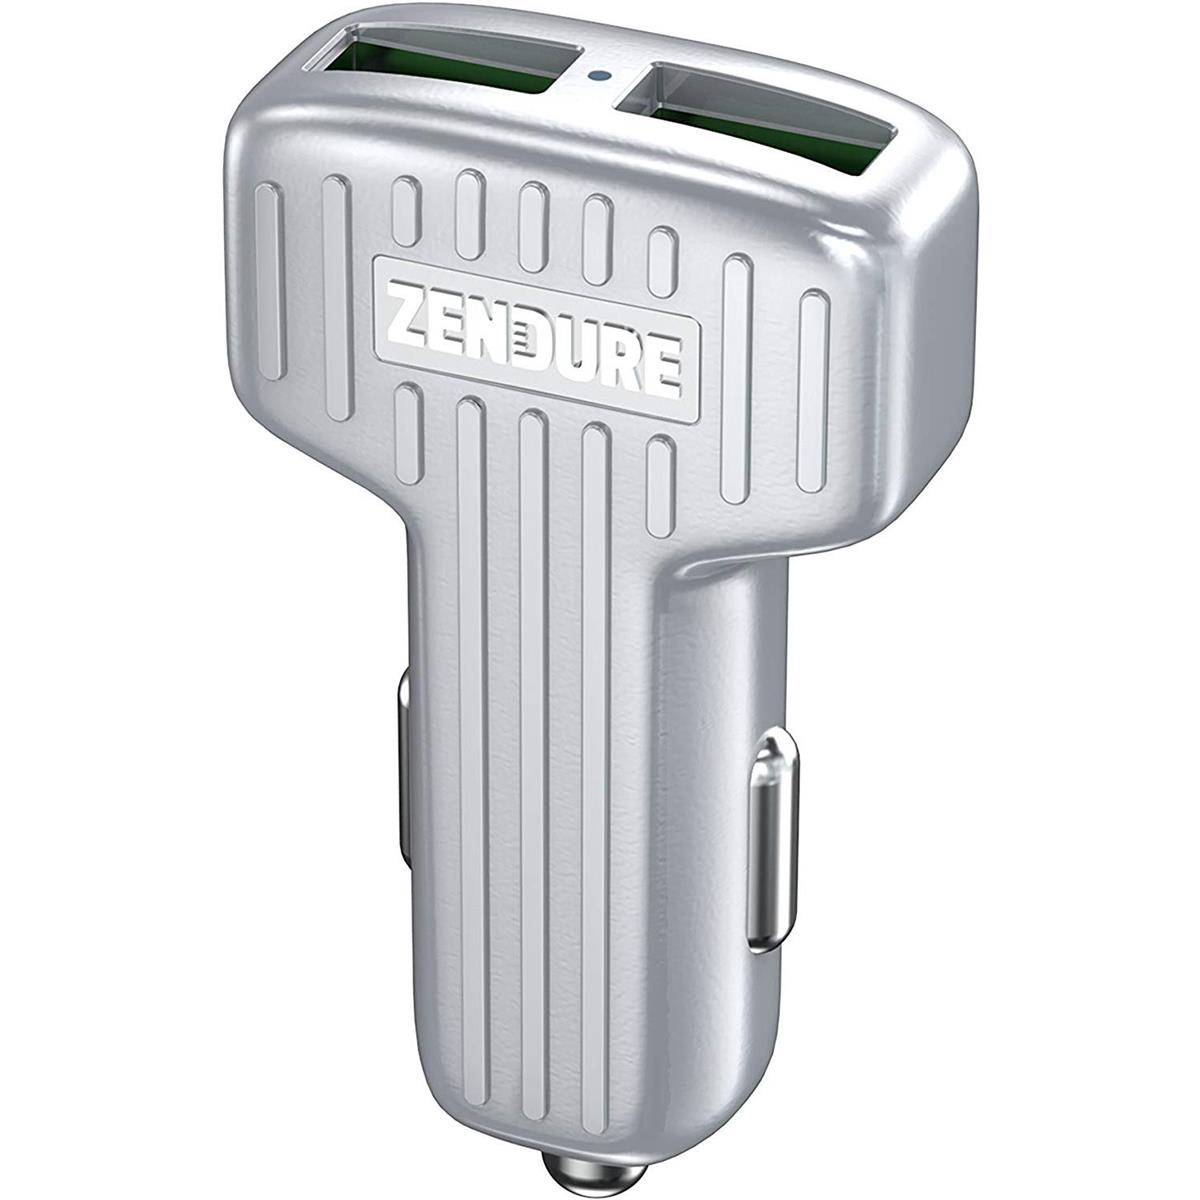 

Zendure 30W Car Charger with QC 3.0 and Dual USB Ports, Silver